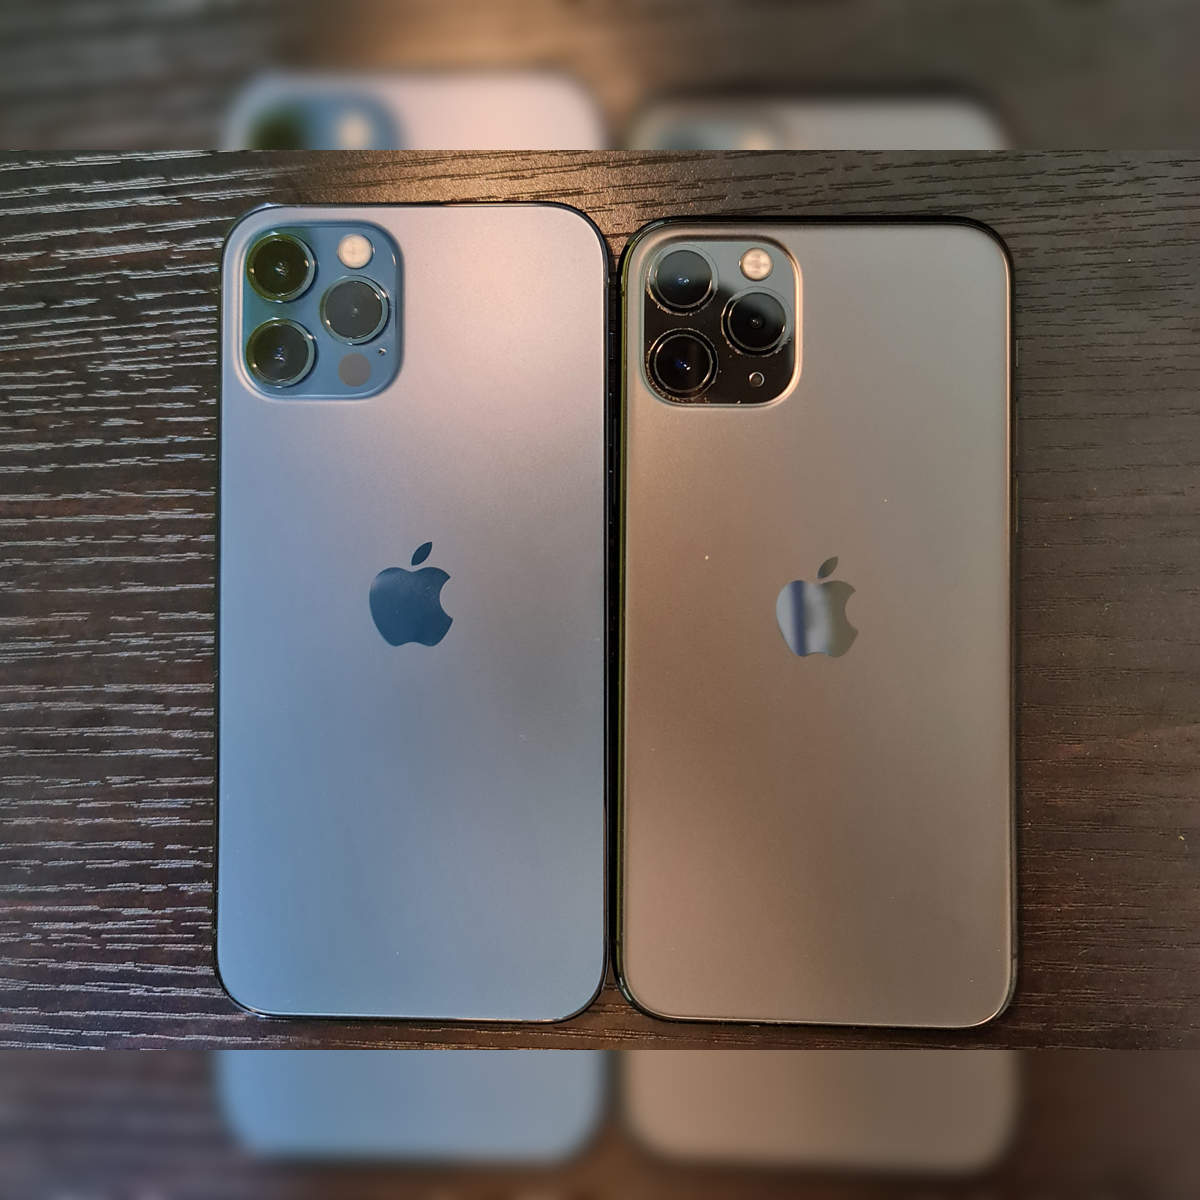 Apple iPhone 12 Pro Review: Camera Tests, How It Compares to iPhone 12